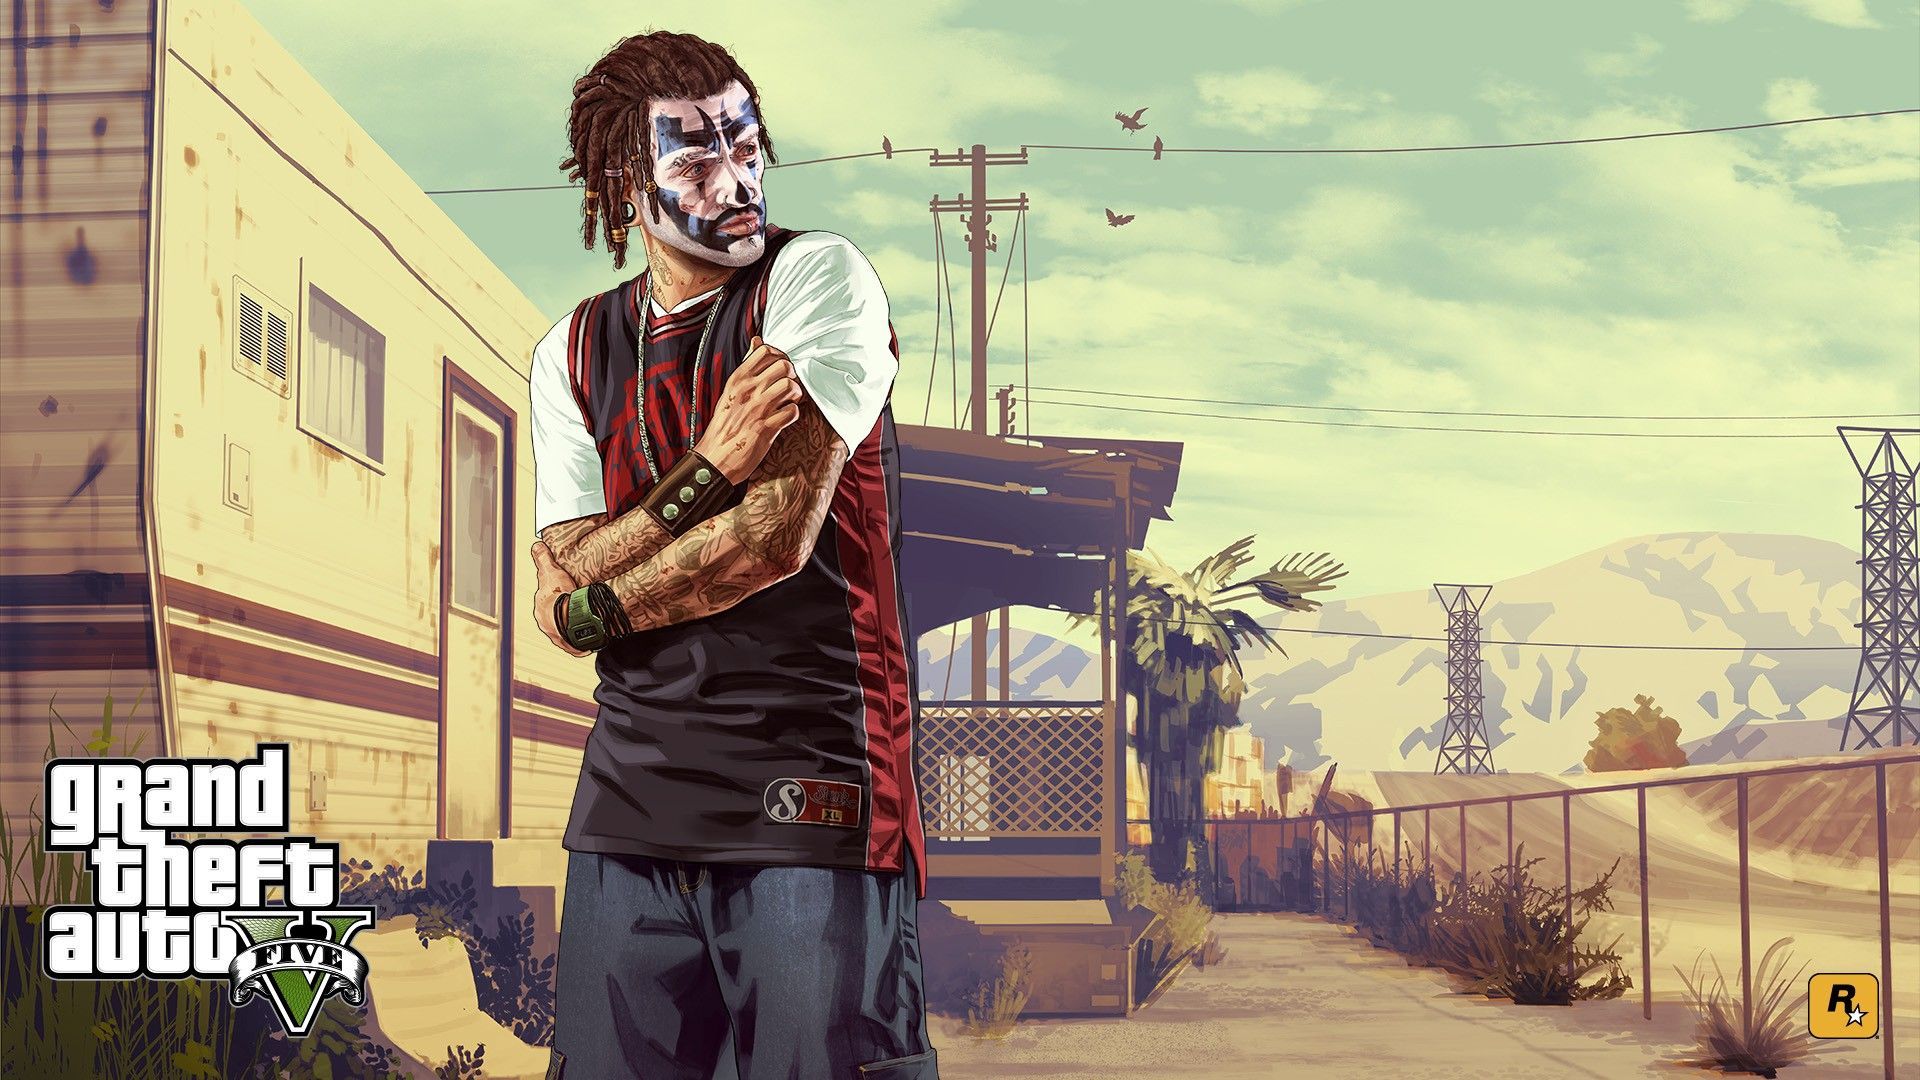 GTA 5 Mobile Finally The Best Action Game Is Available For Mobile. Grand theft auto, Gta, Grand theft auto artwork